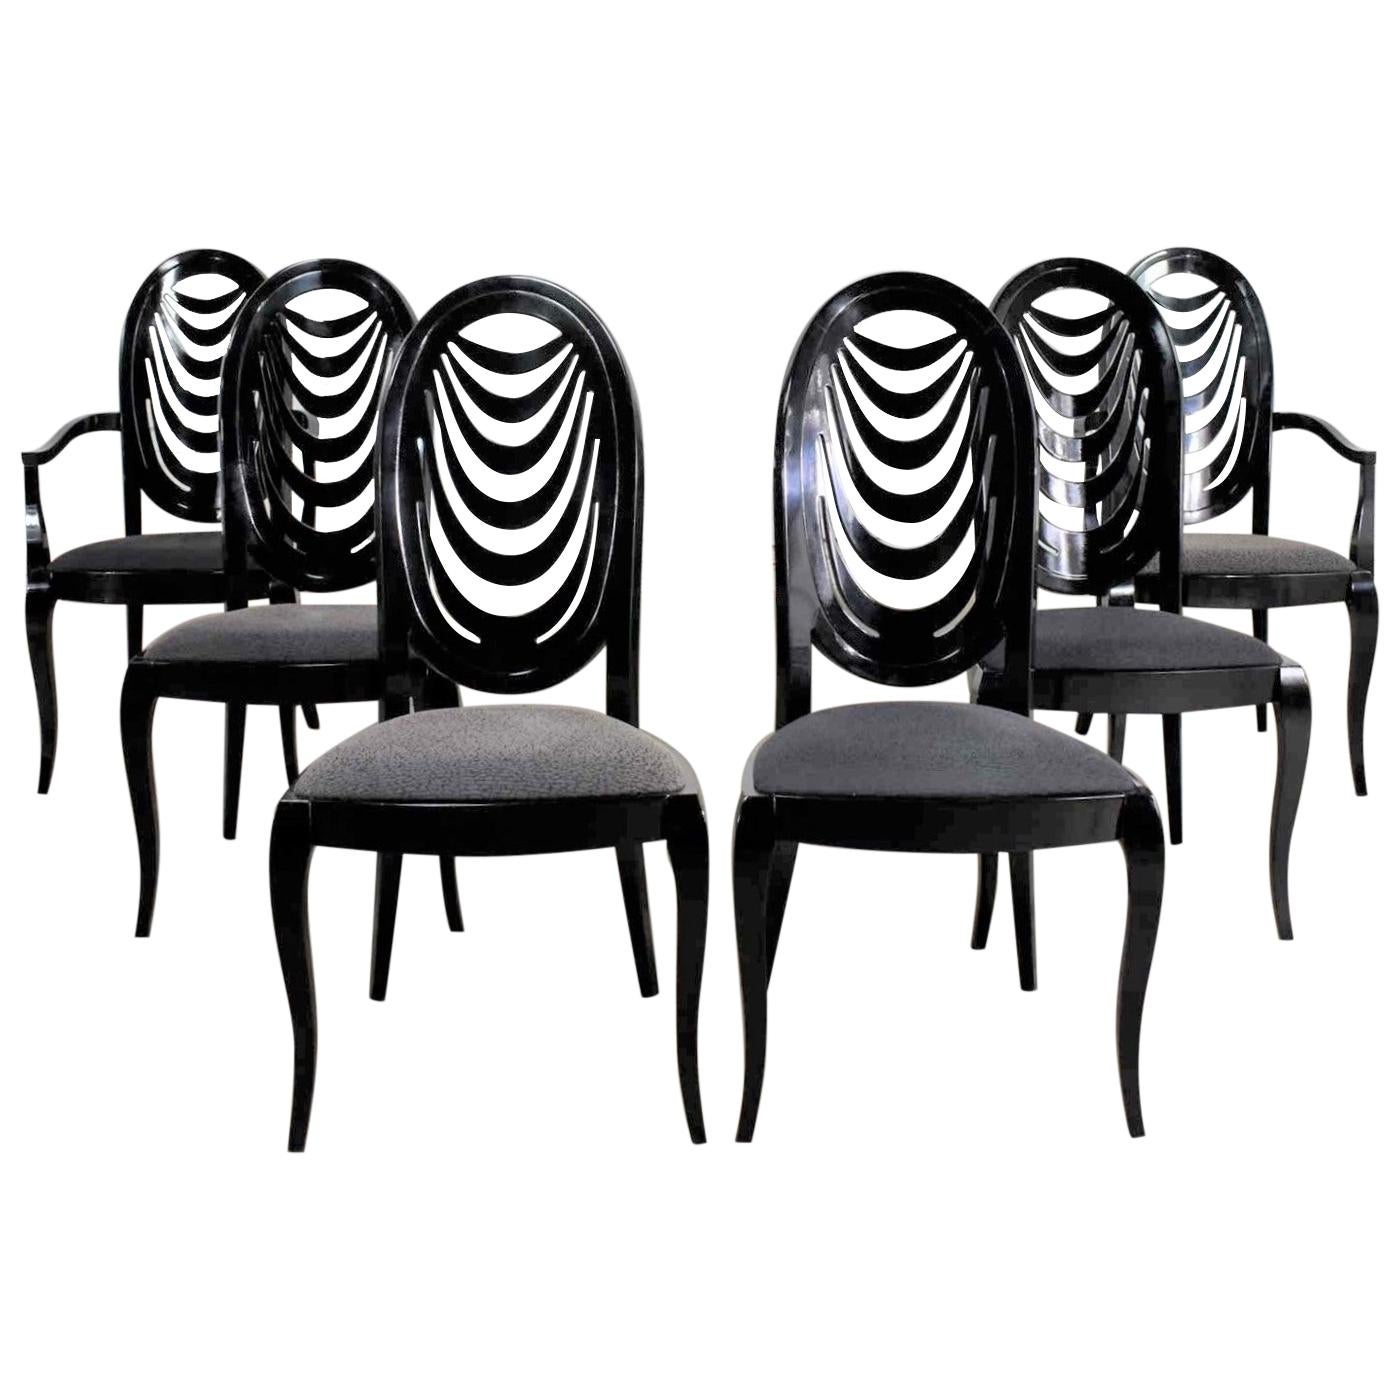 Black Lacquer Oval Drape Back Dining Chairs, Pietro Costantini for Ello Set of 6